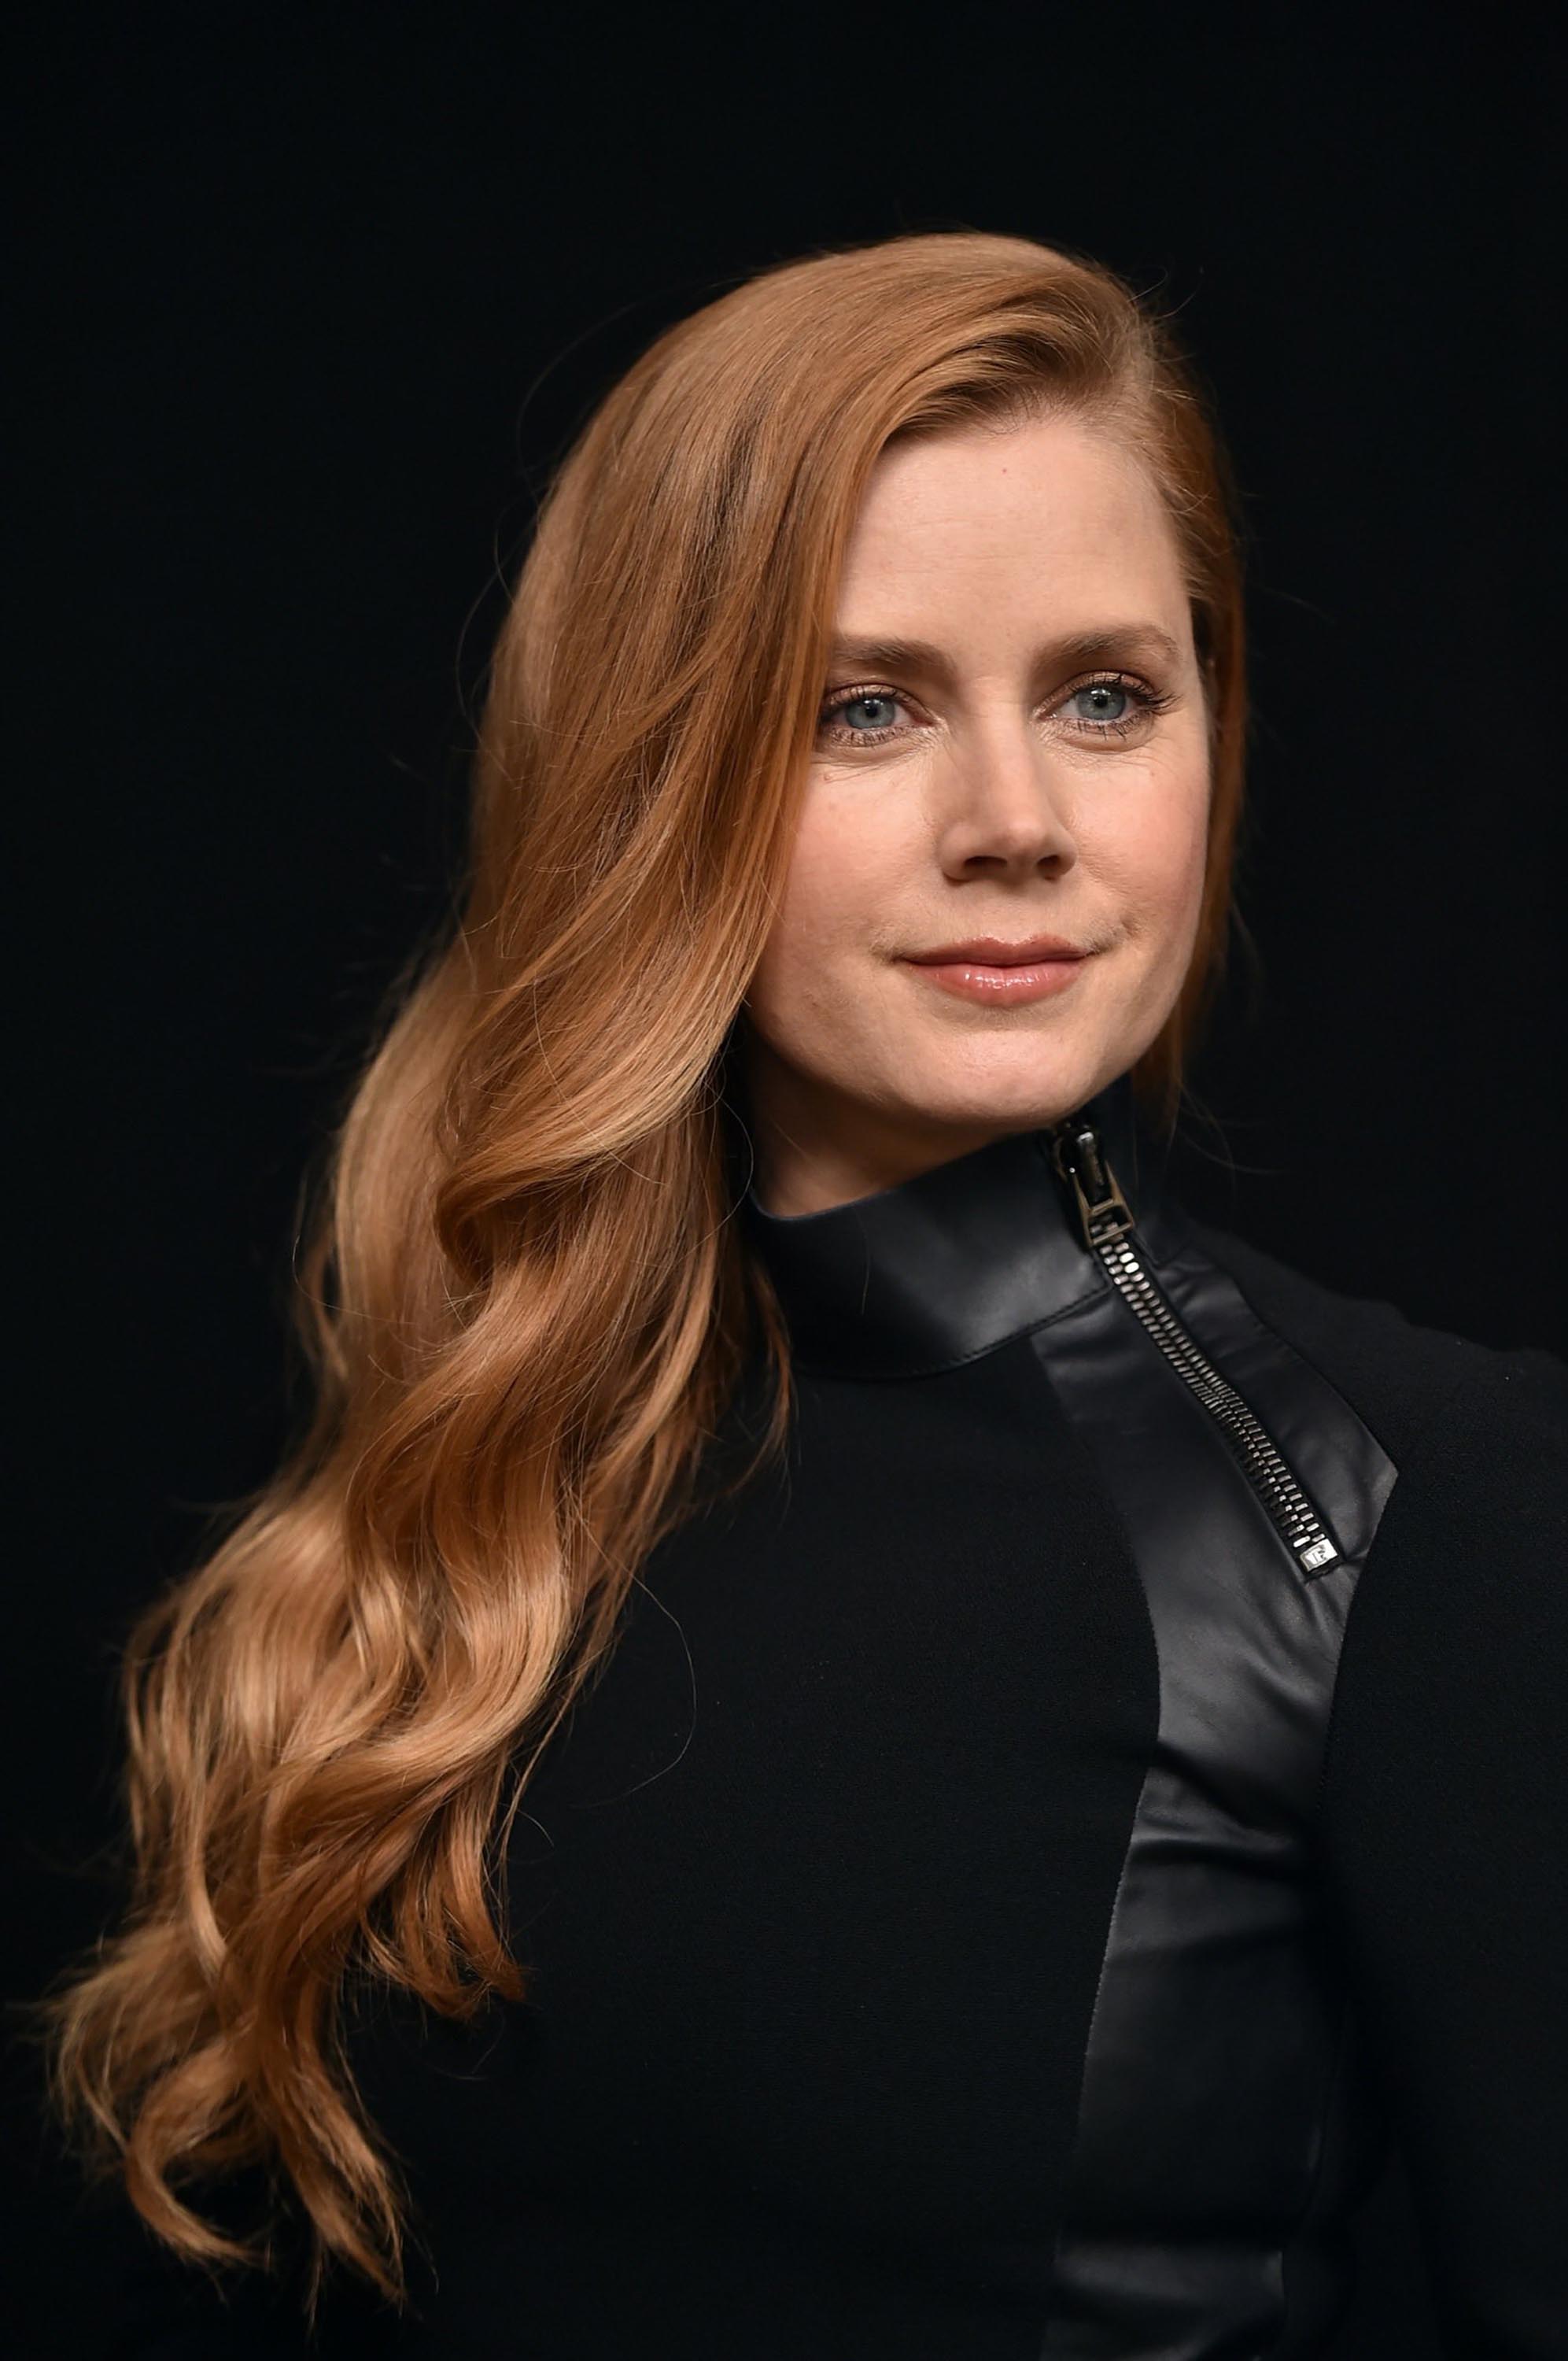 Amy Adams attends Nocturnal Animals Photocall